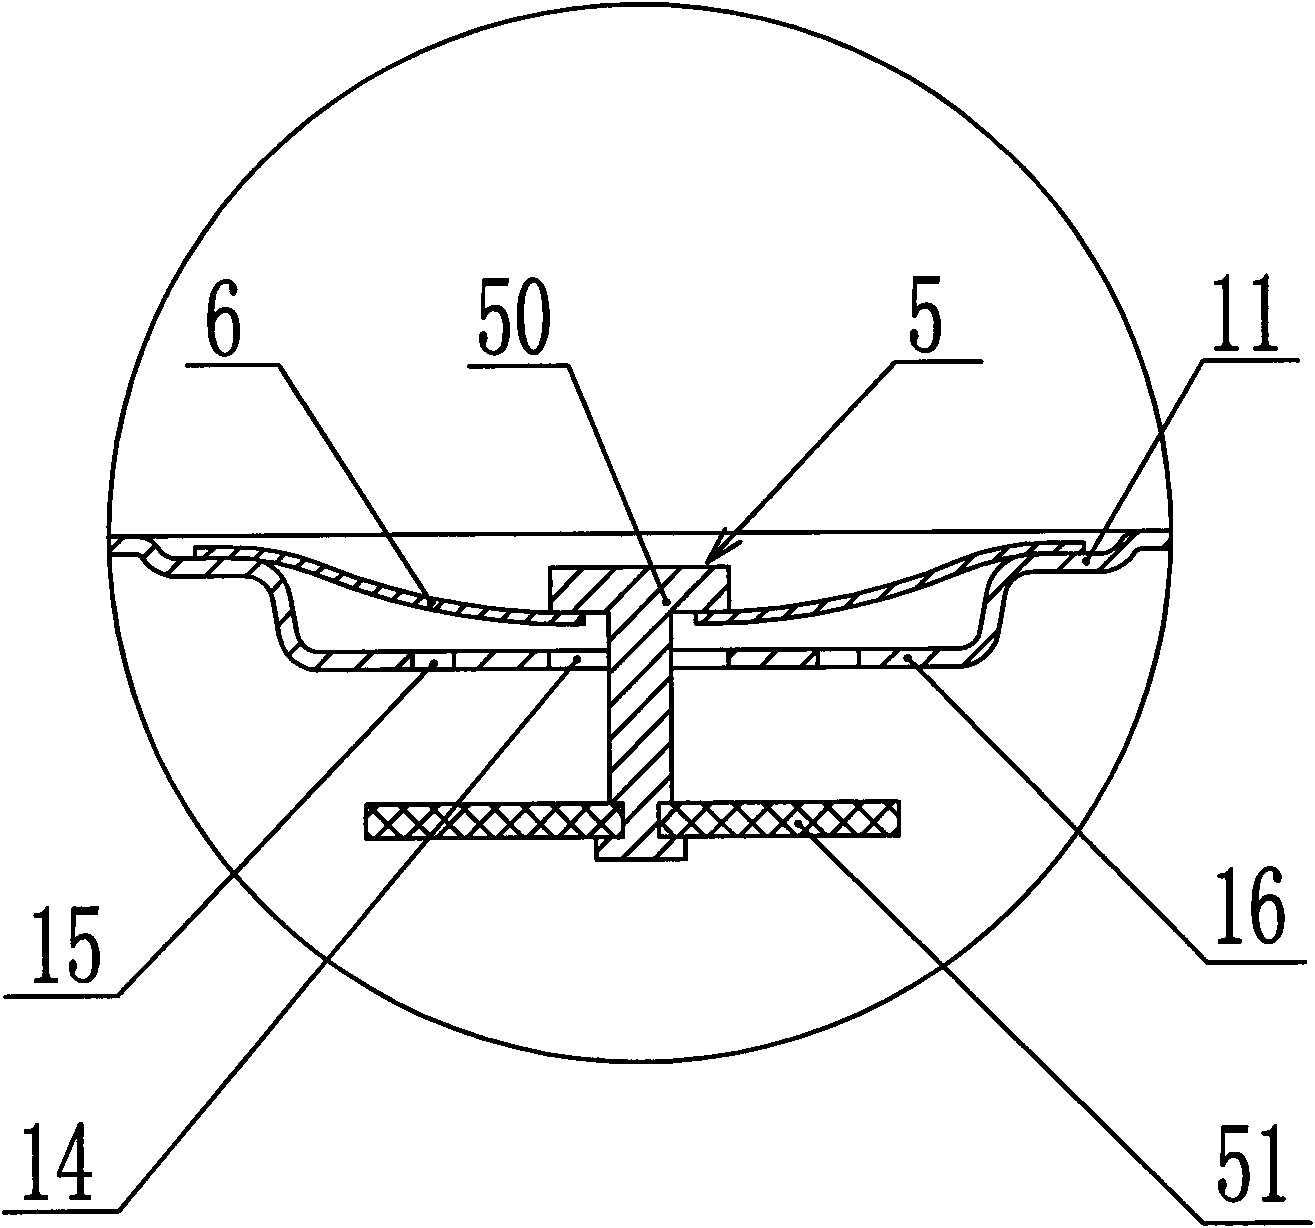 Air intake/evacuation valve for electric cooking appliance